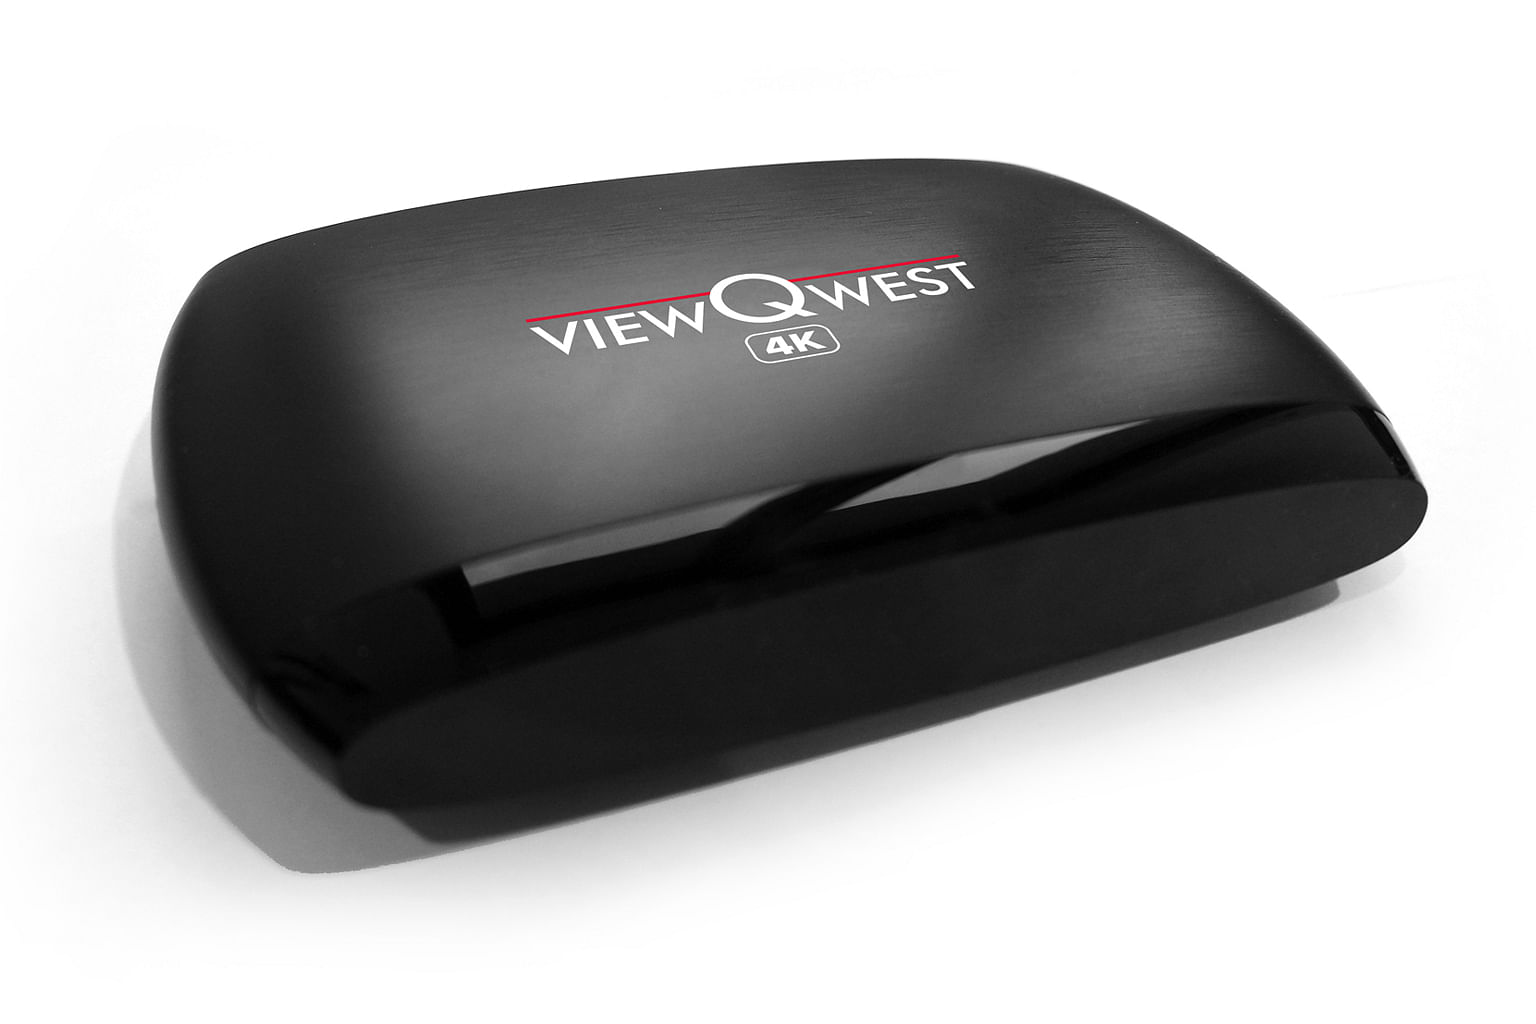 To enable Freedom VPN on the ViewQwest TV, you simply click a button within the preloaded DNS login app. There is no need to configure your home router or devices.